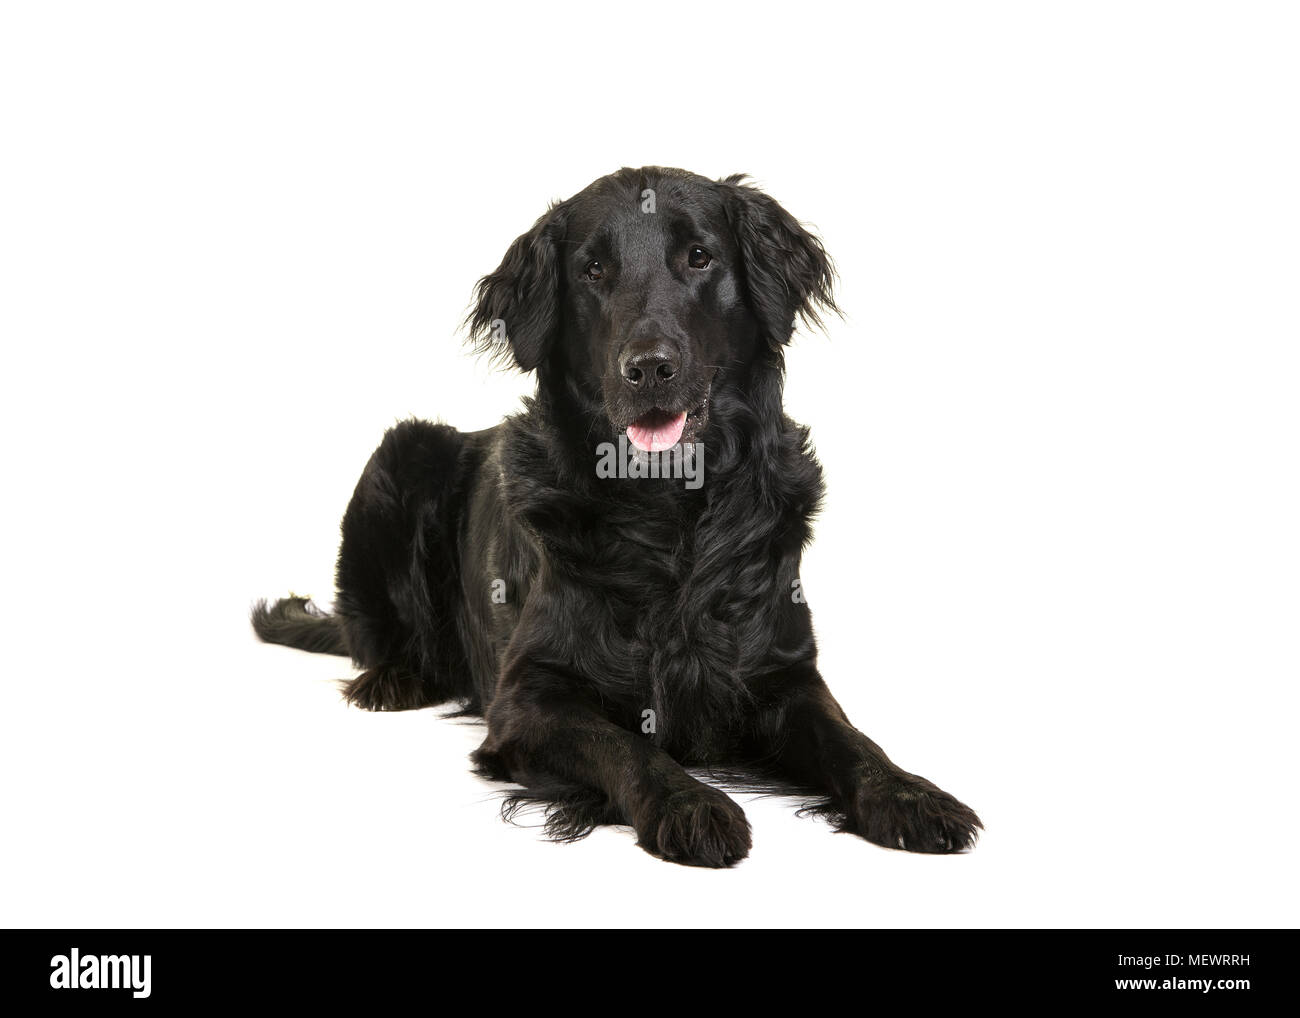 Black flatcoat retriever dog lying down looking at camera on a white background Stock Photo